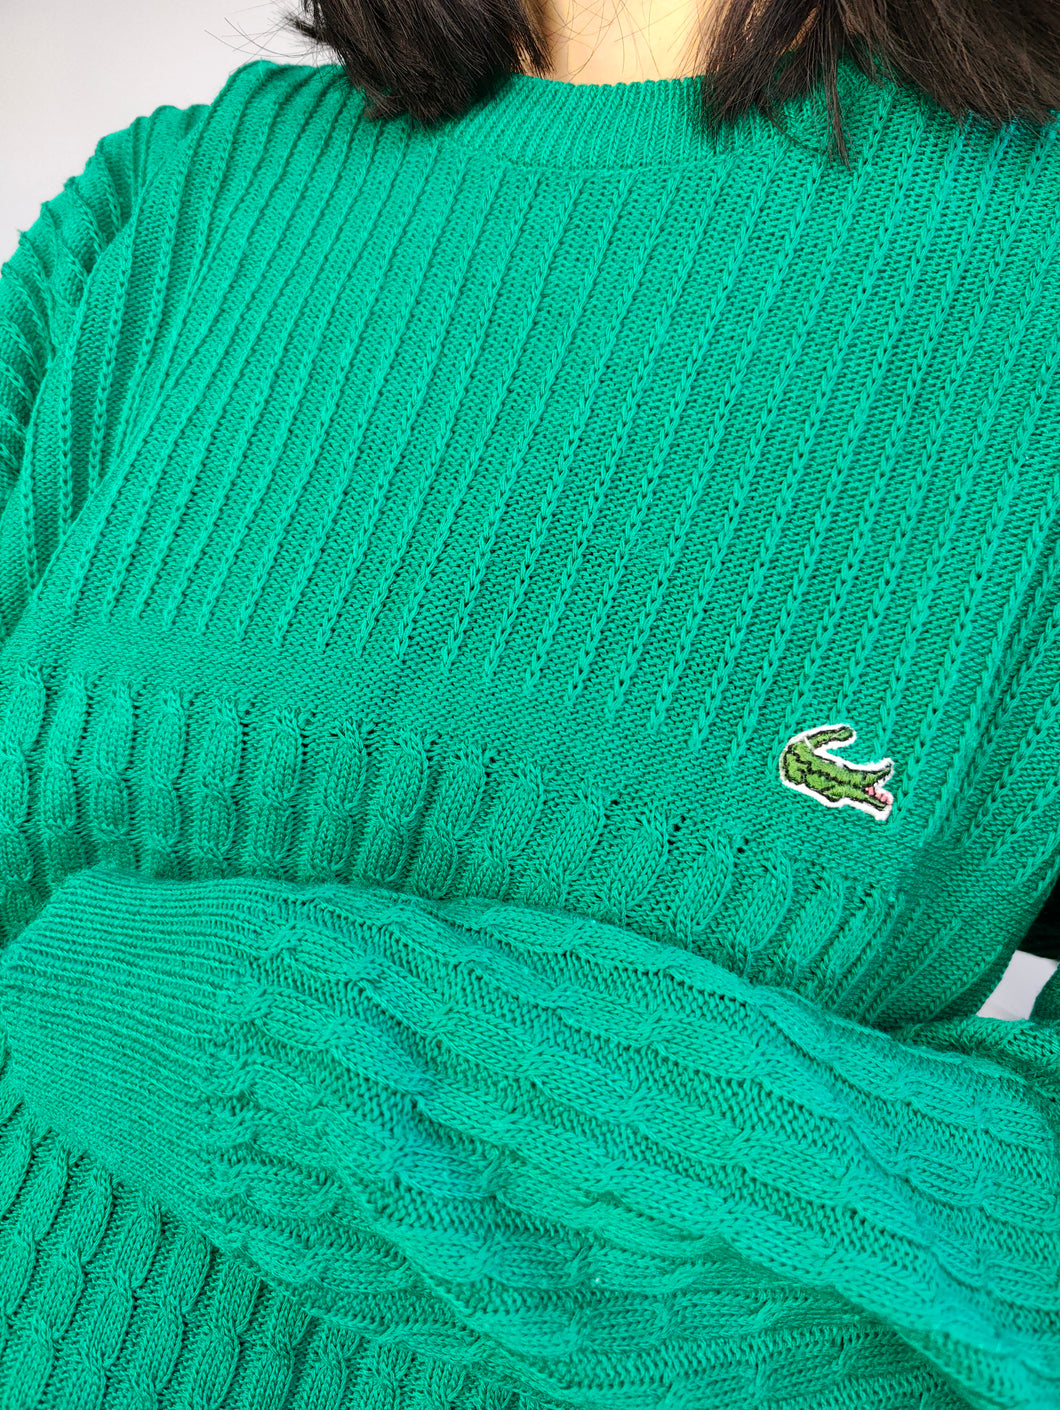 Vintage Lacoste cotton sweater cable knit turquoise green plain fall winter knitted pullover jumper unisex men M